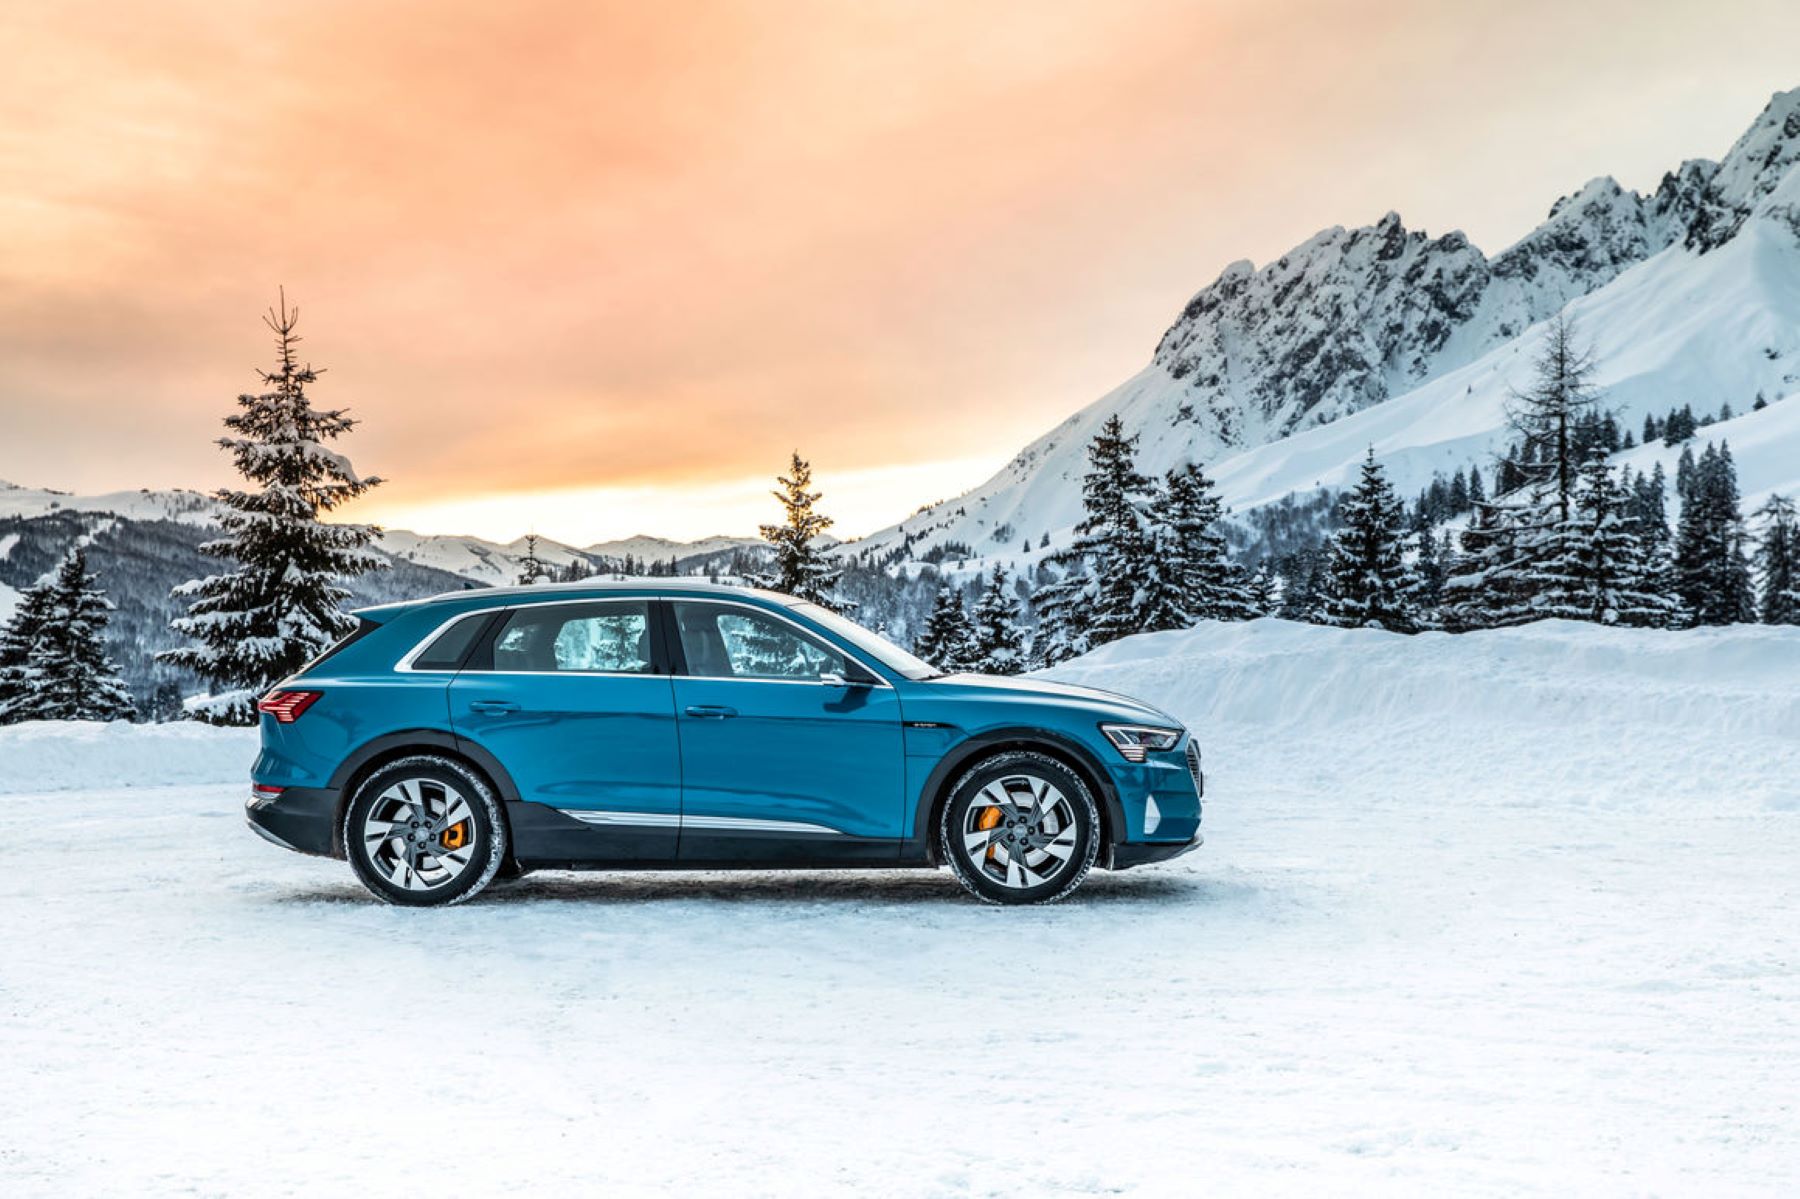 The Audi e-tron all-electric SUV model parked in snow in the mountains as the sun begins to set